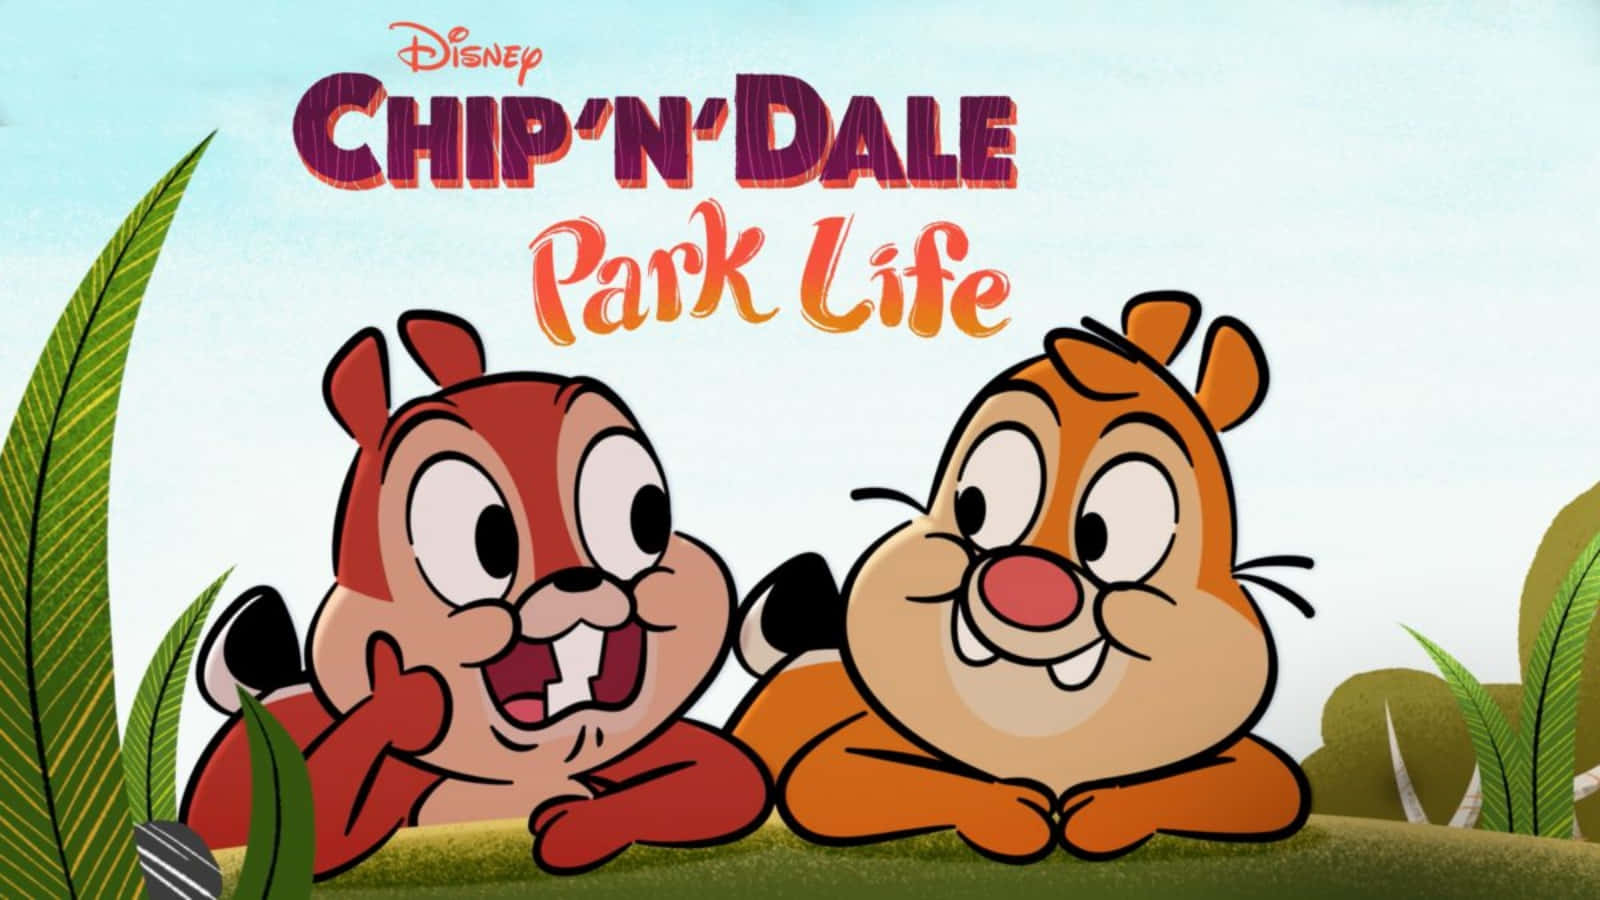 "Chip N Dale bring sunshine to any day!"